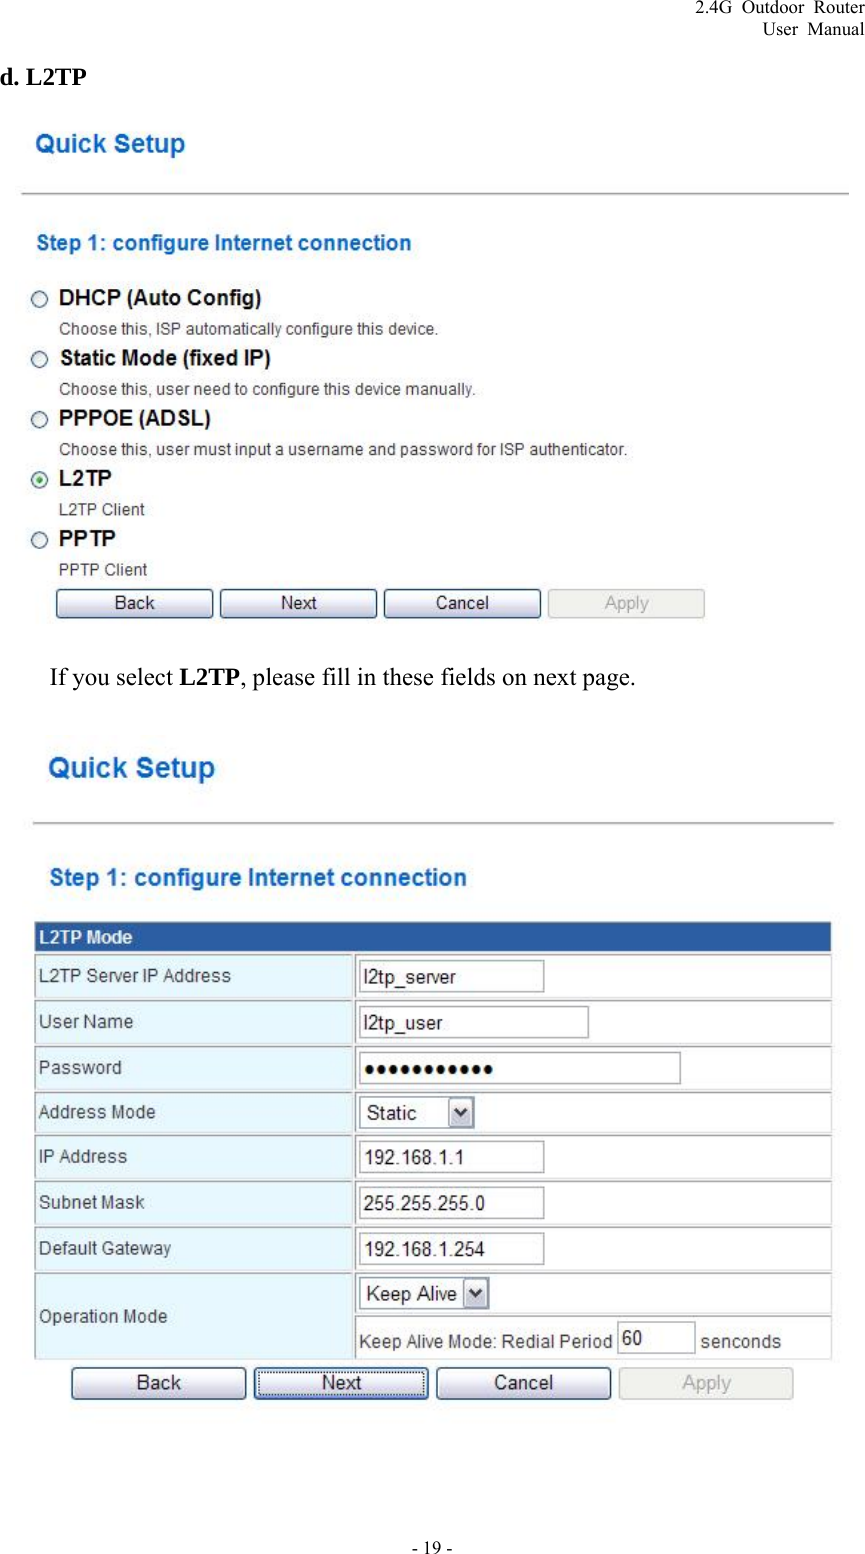 2.4G Outdoor Router User Manual d. L2TP  If you select L2TP, please fill in these fields on next page.    - 19 - 